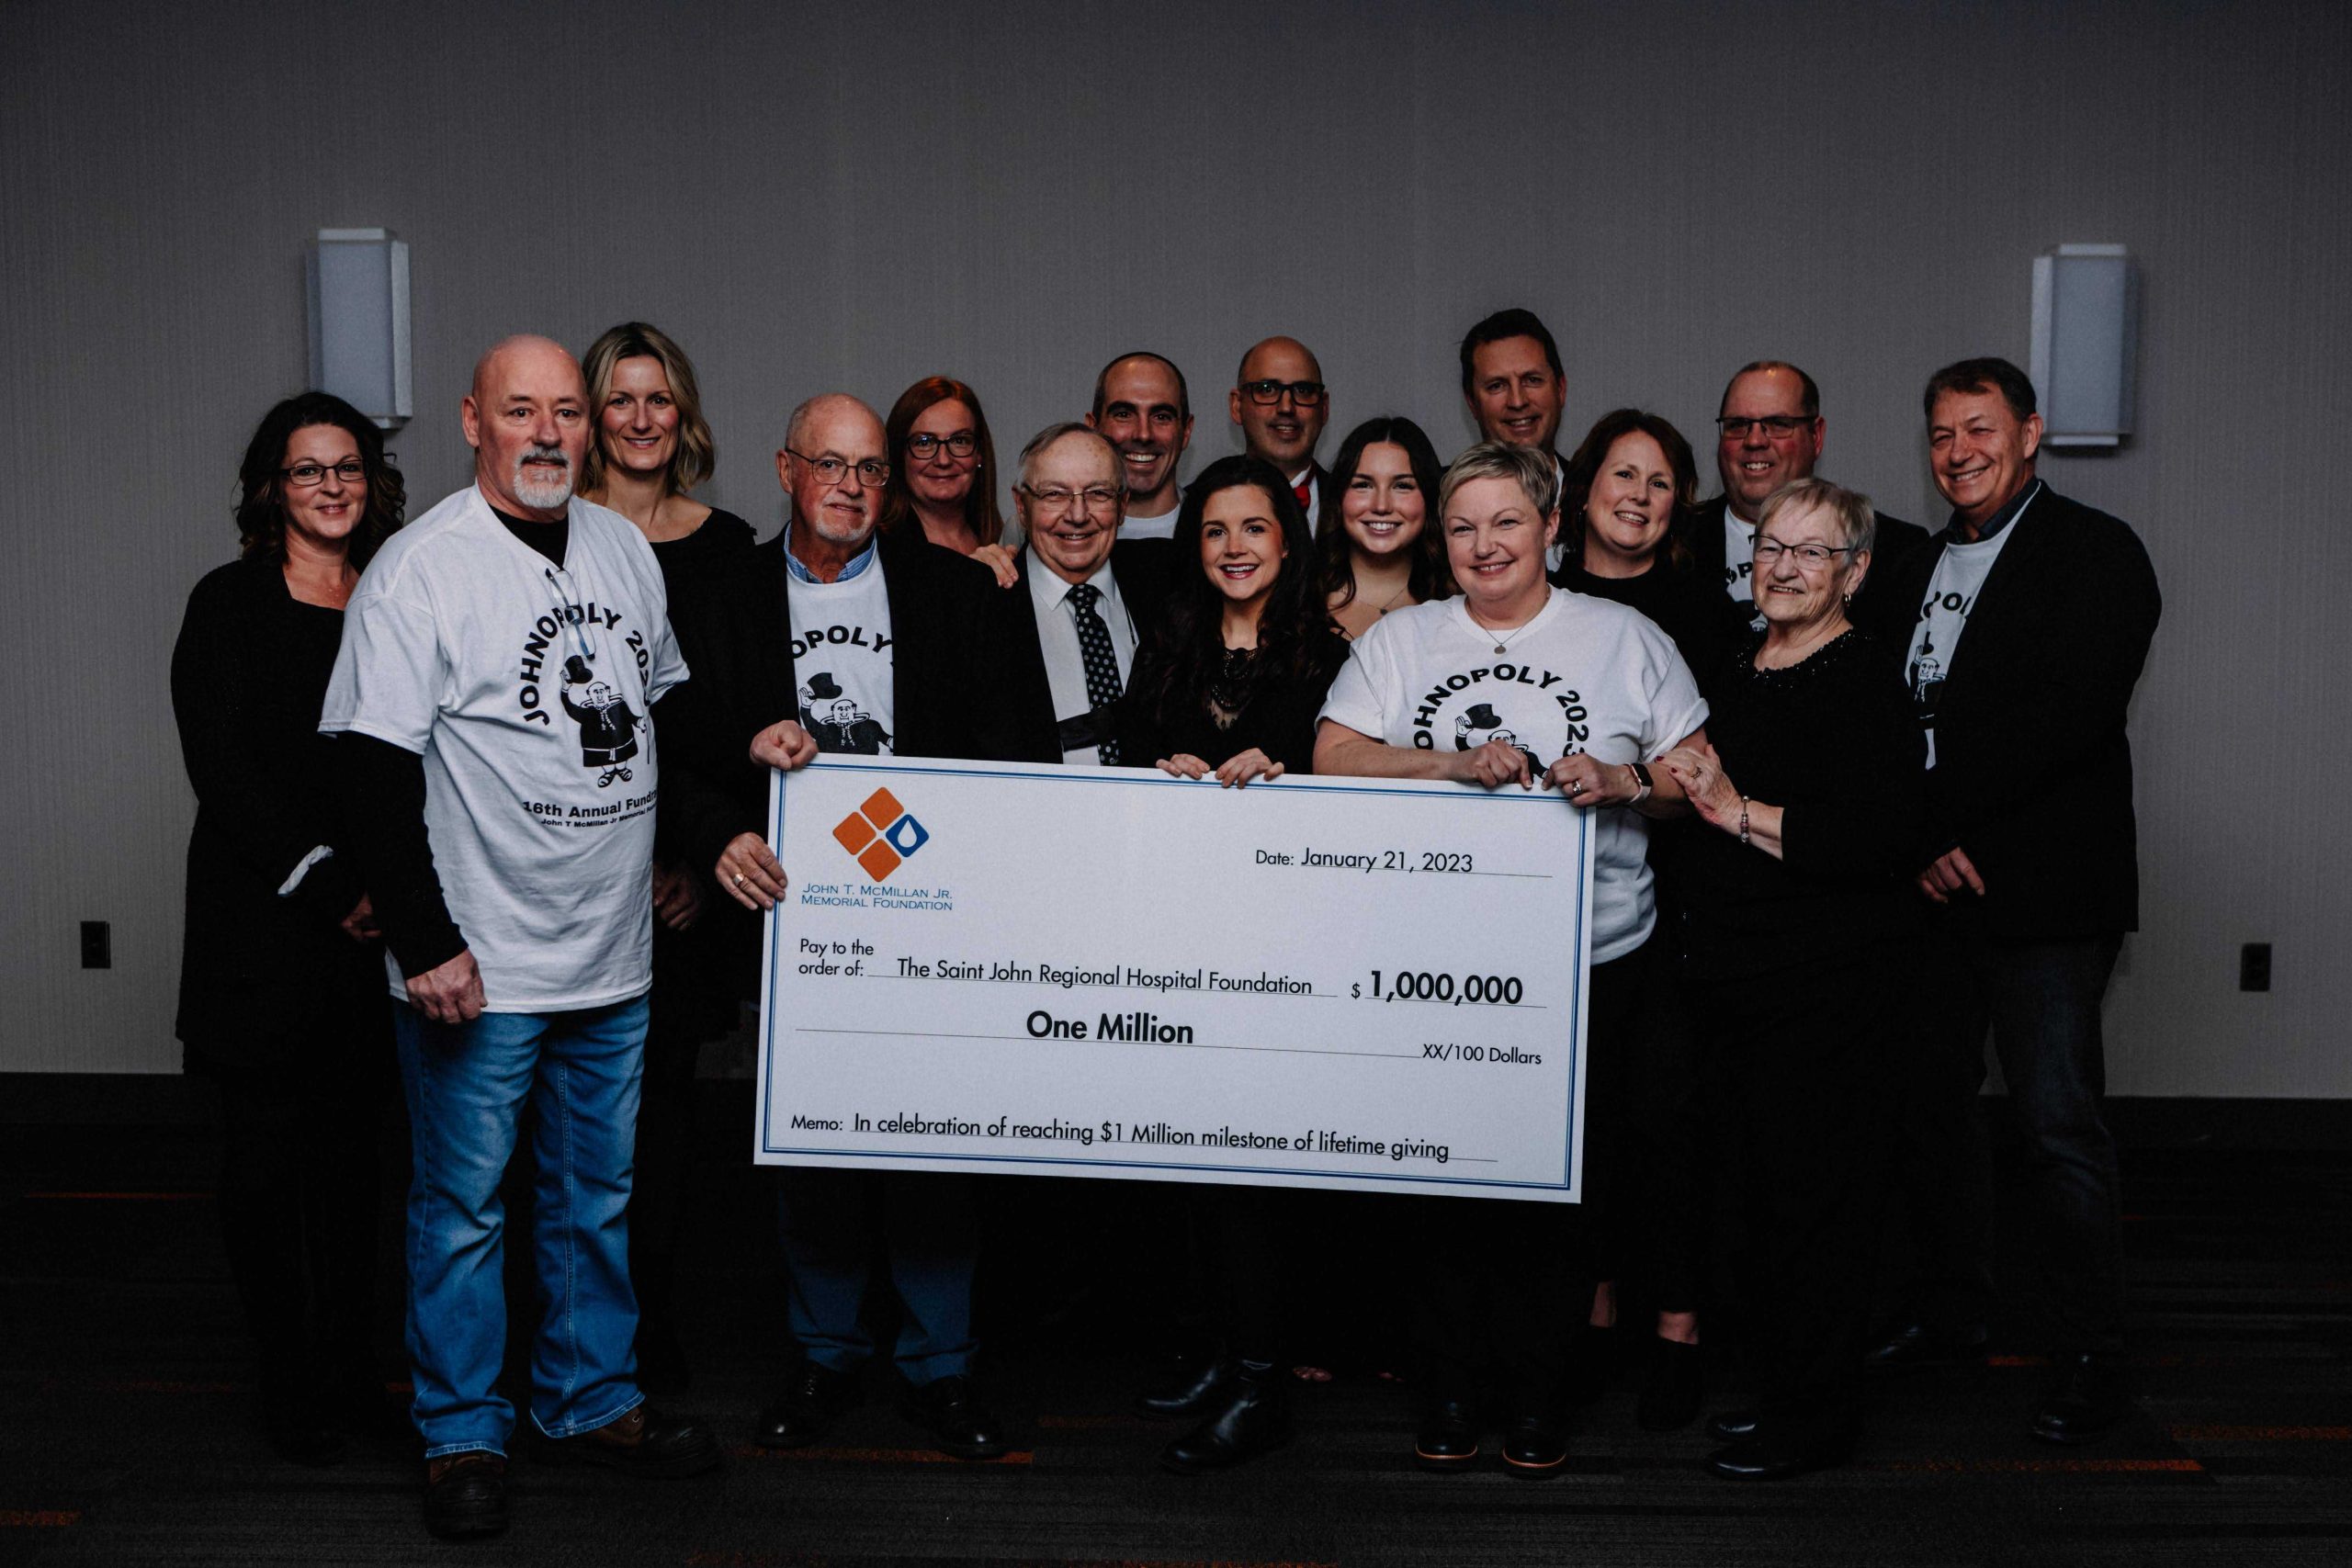 Cheque photo members of the Saint John Regional Hospital Foundation are joined by the Mc Millan family as well as members of the board past and present for the John T Mc Millan Jr Memorial Foundation.